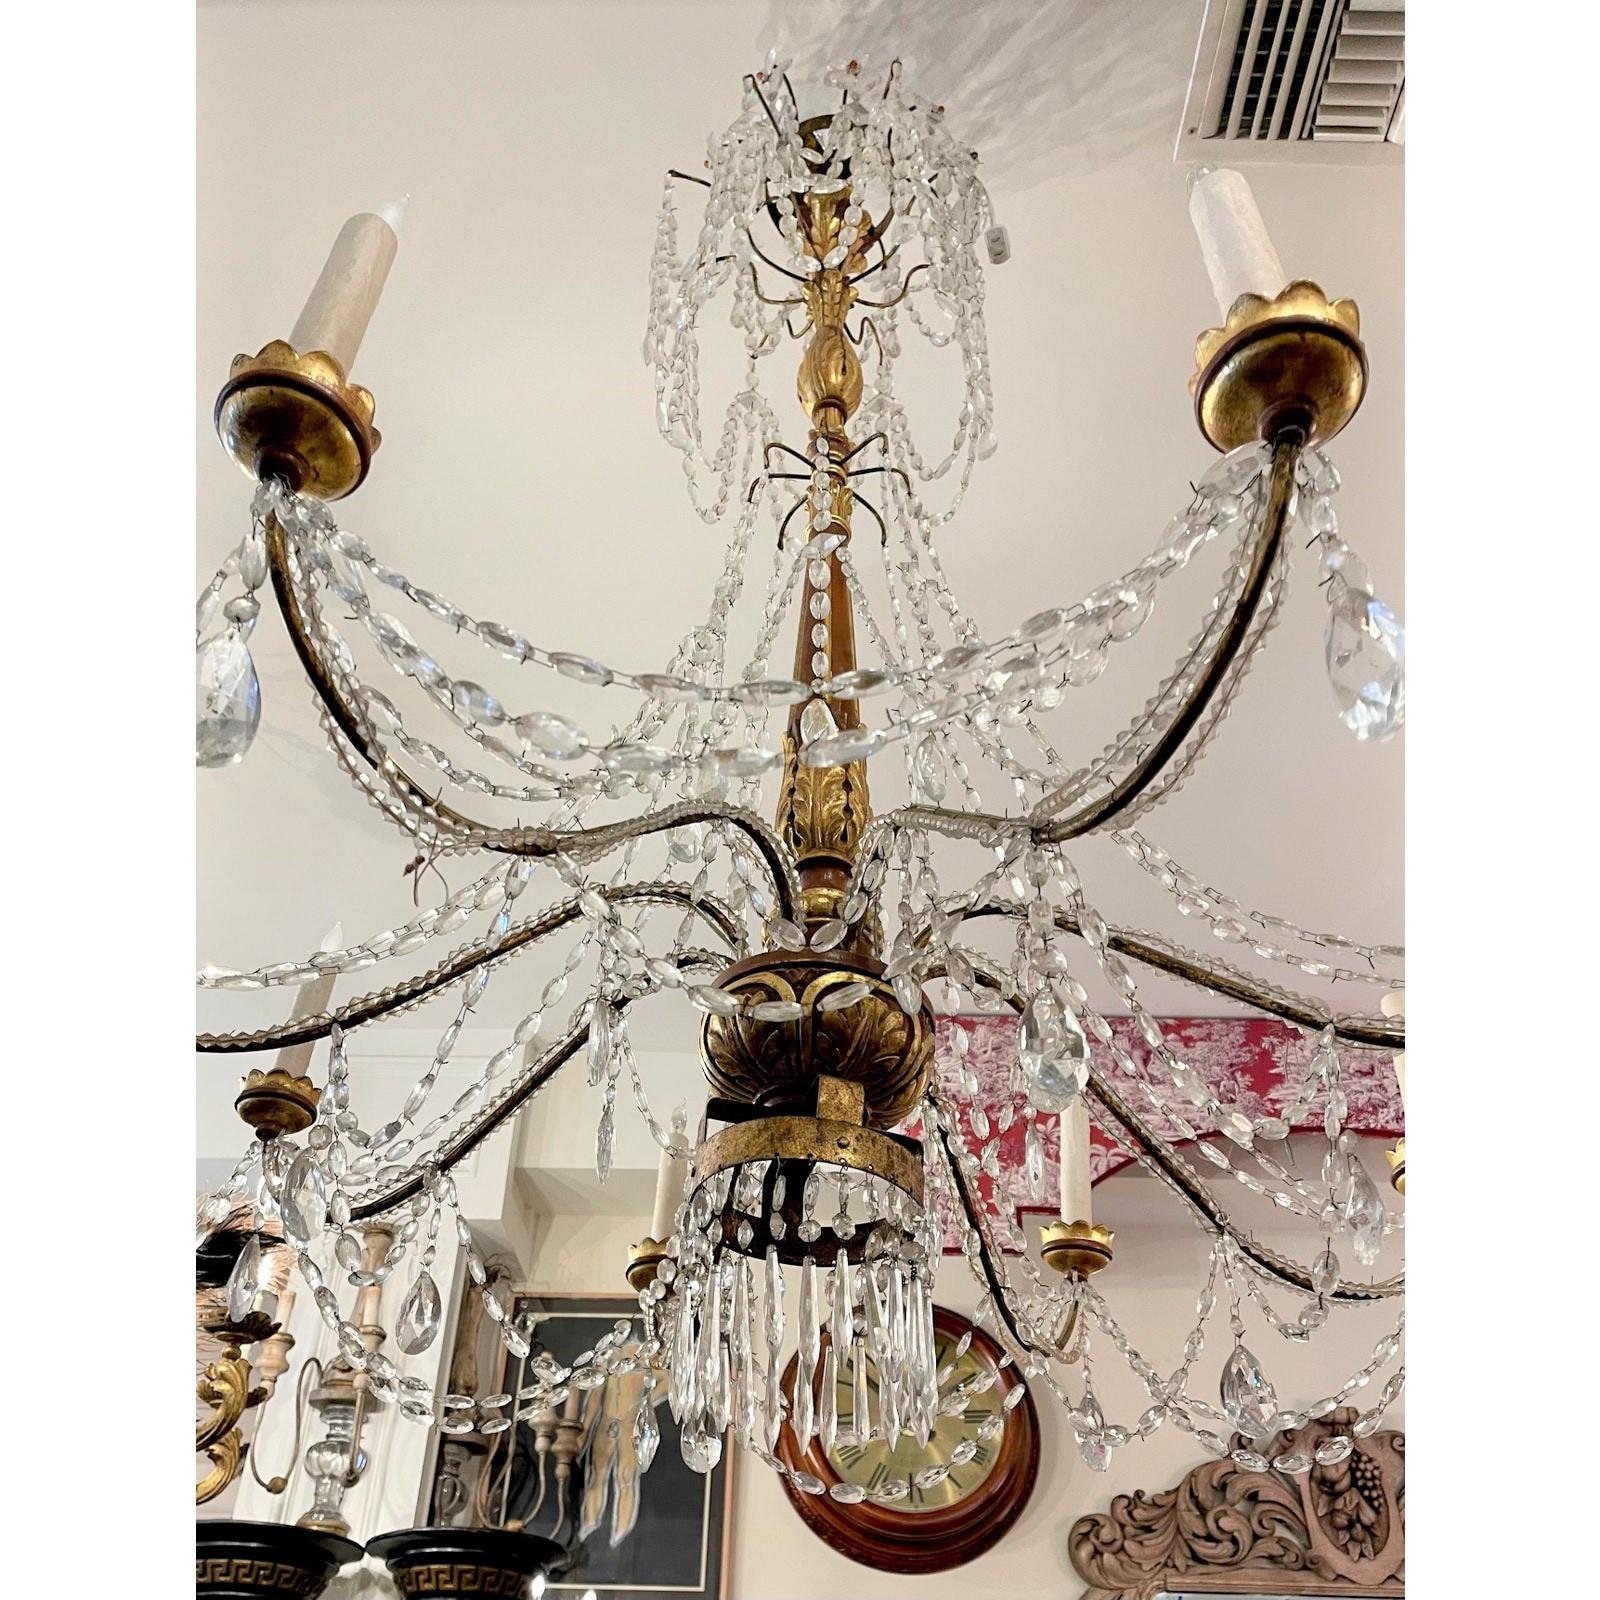 19th Century Monumental Antique Italian Giltwood Chandelier, Therien Collection